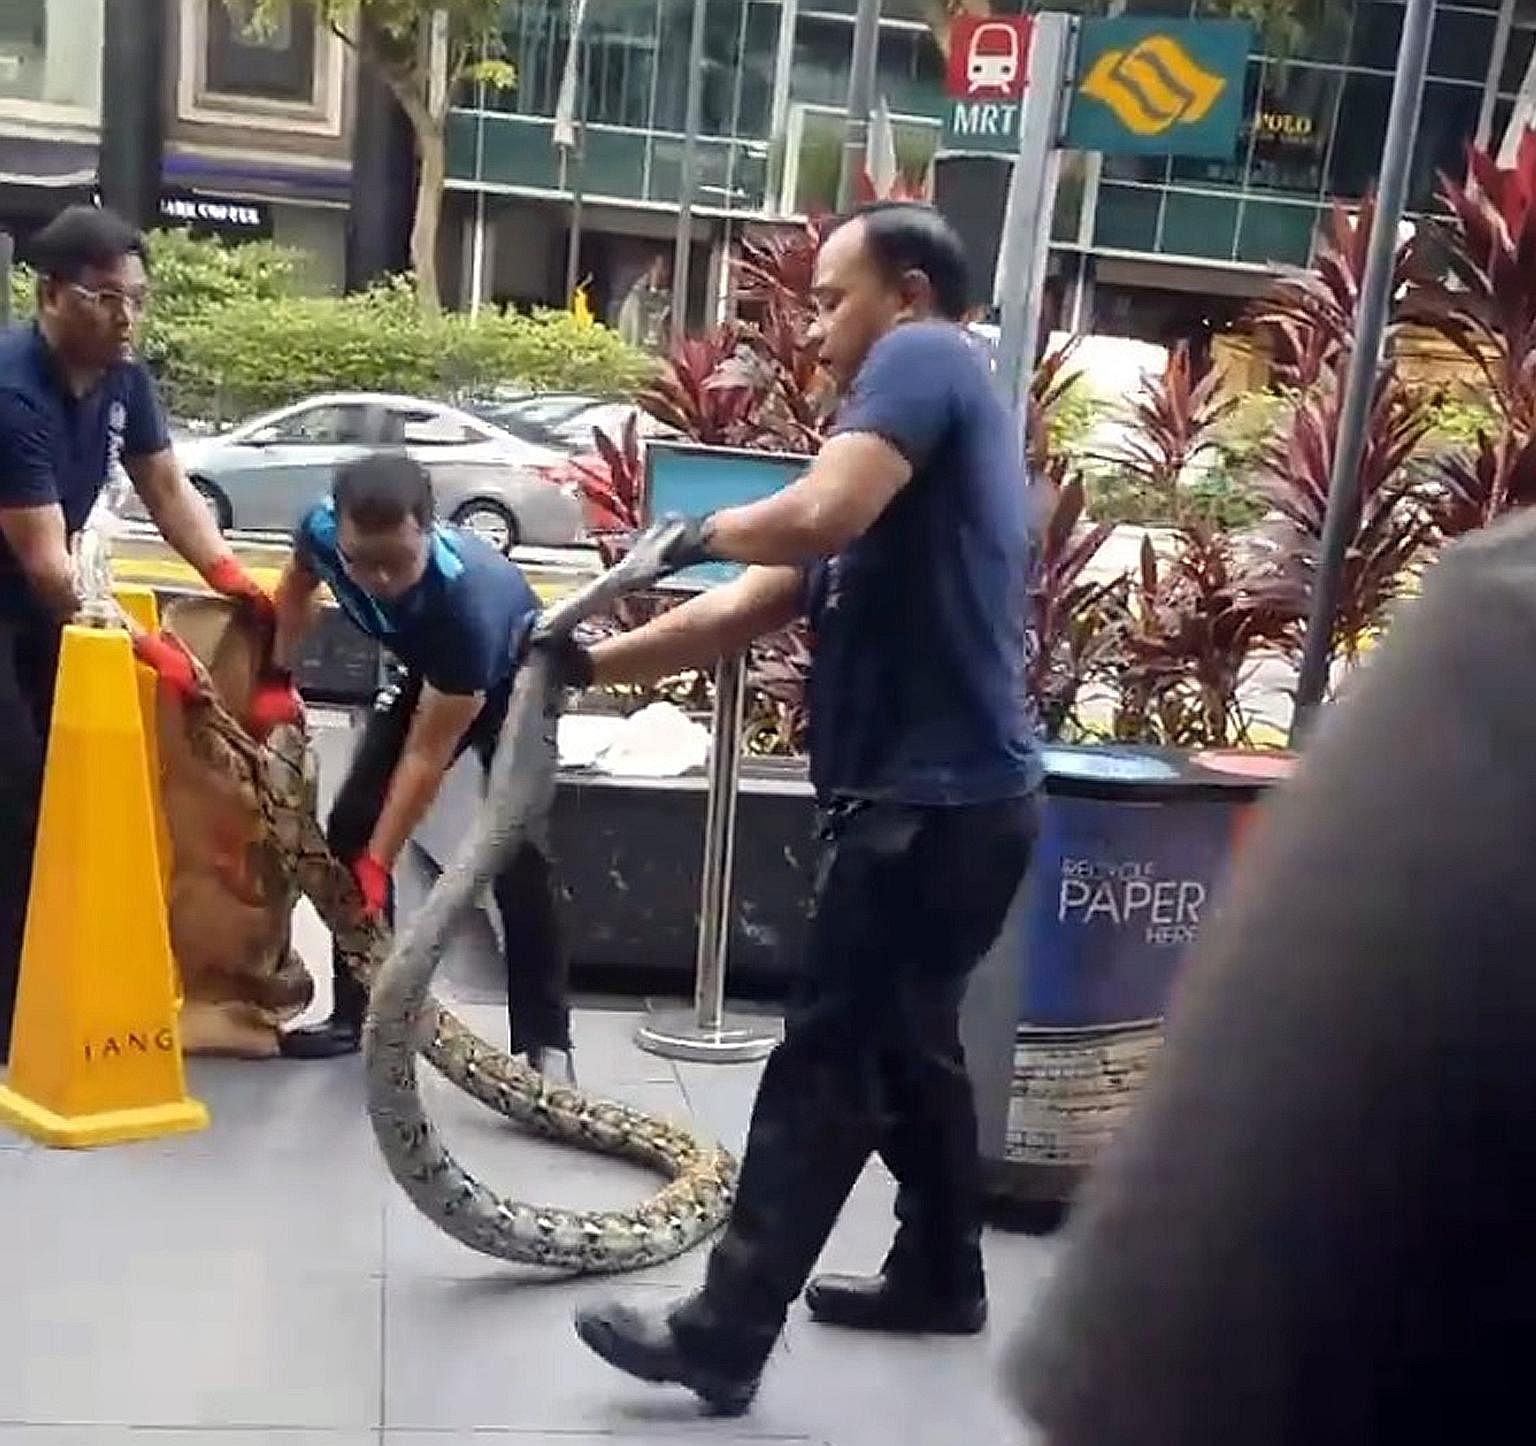 A python that found its way to Orchard Road stunned passers-by as it struggled to free itself from capture yesterday morning. About 3m long, the snake was spotted outside Tang Plaza. The Agri-Food and Veterinary Authority said the snake was removed a